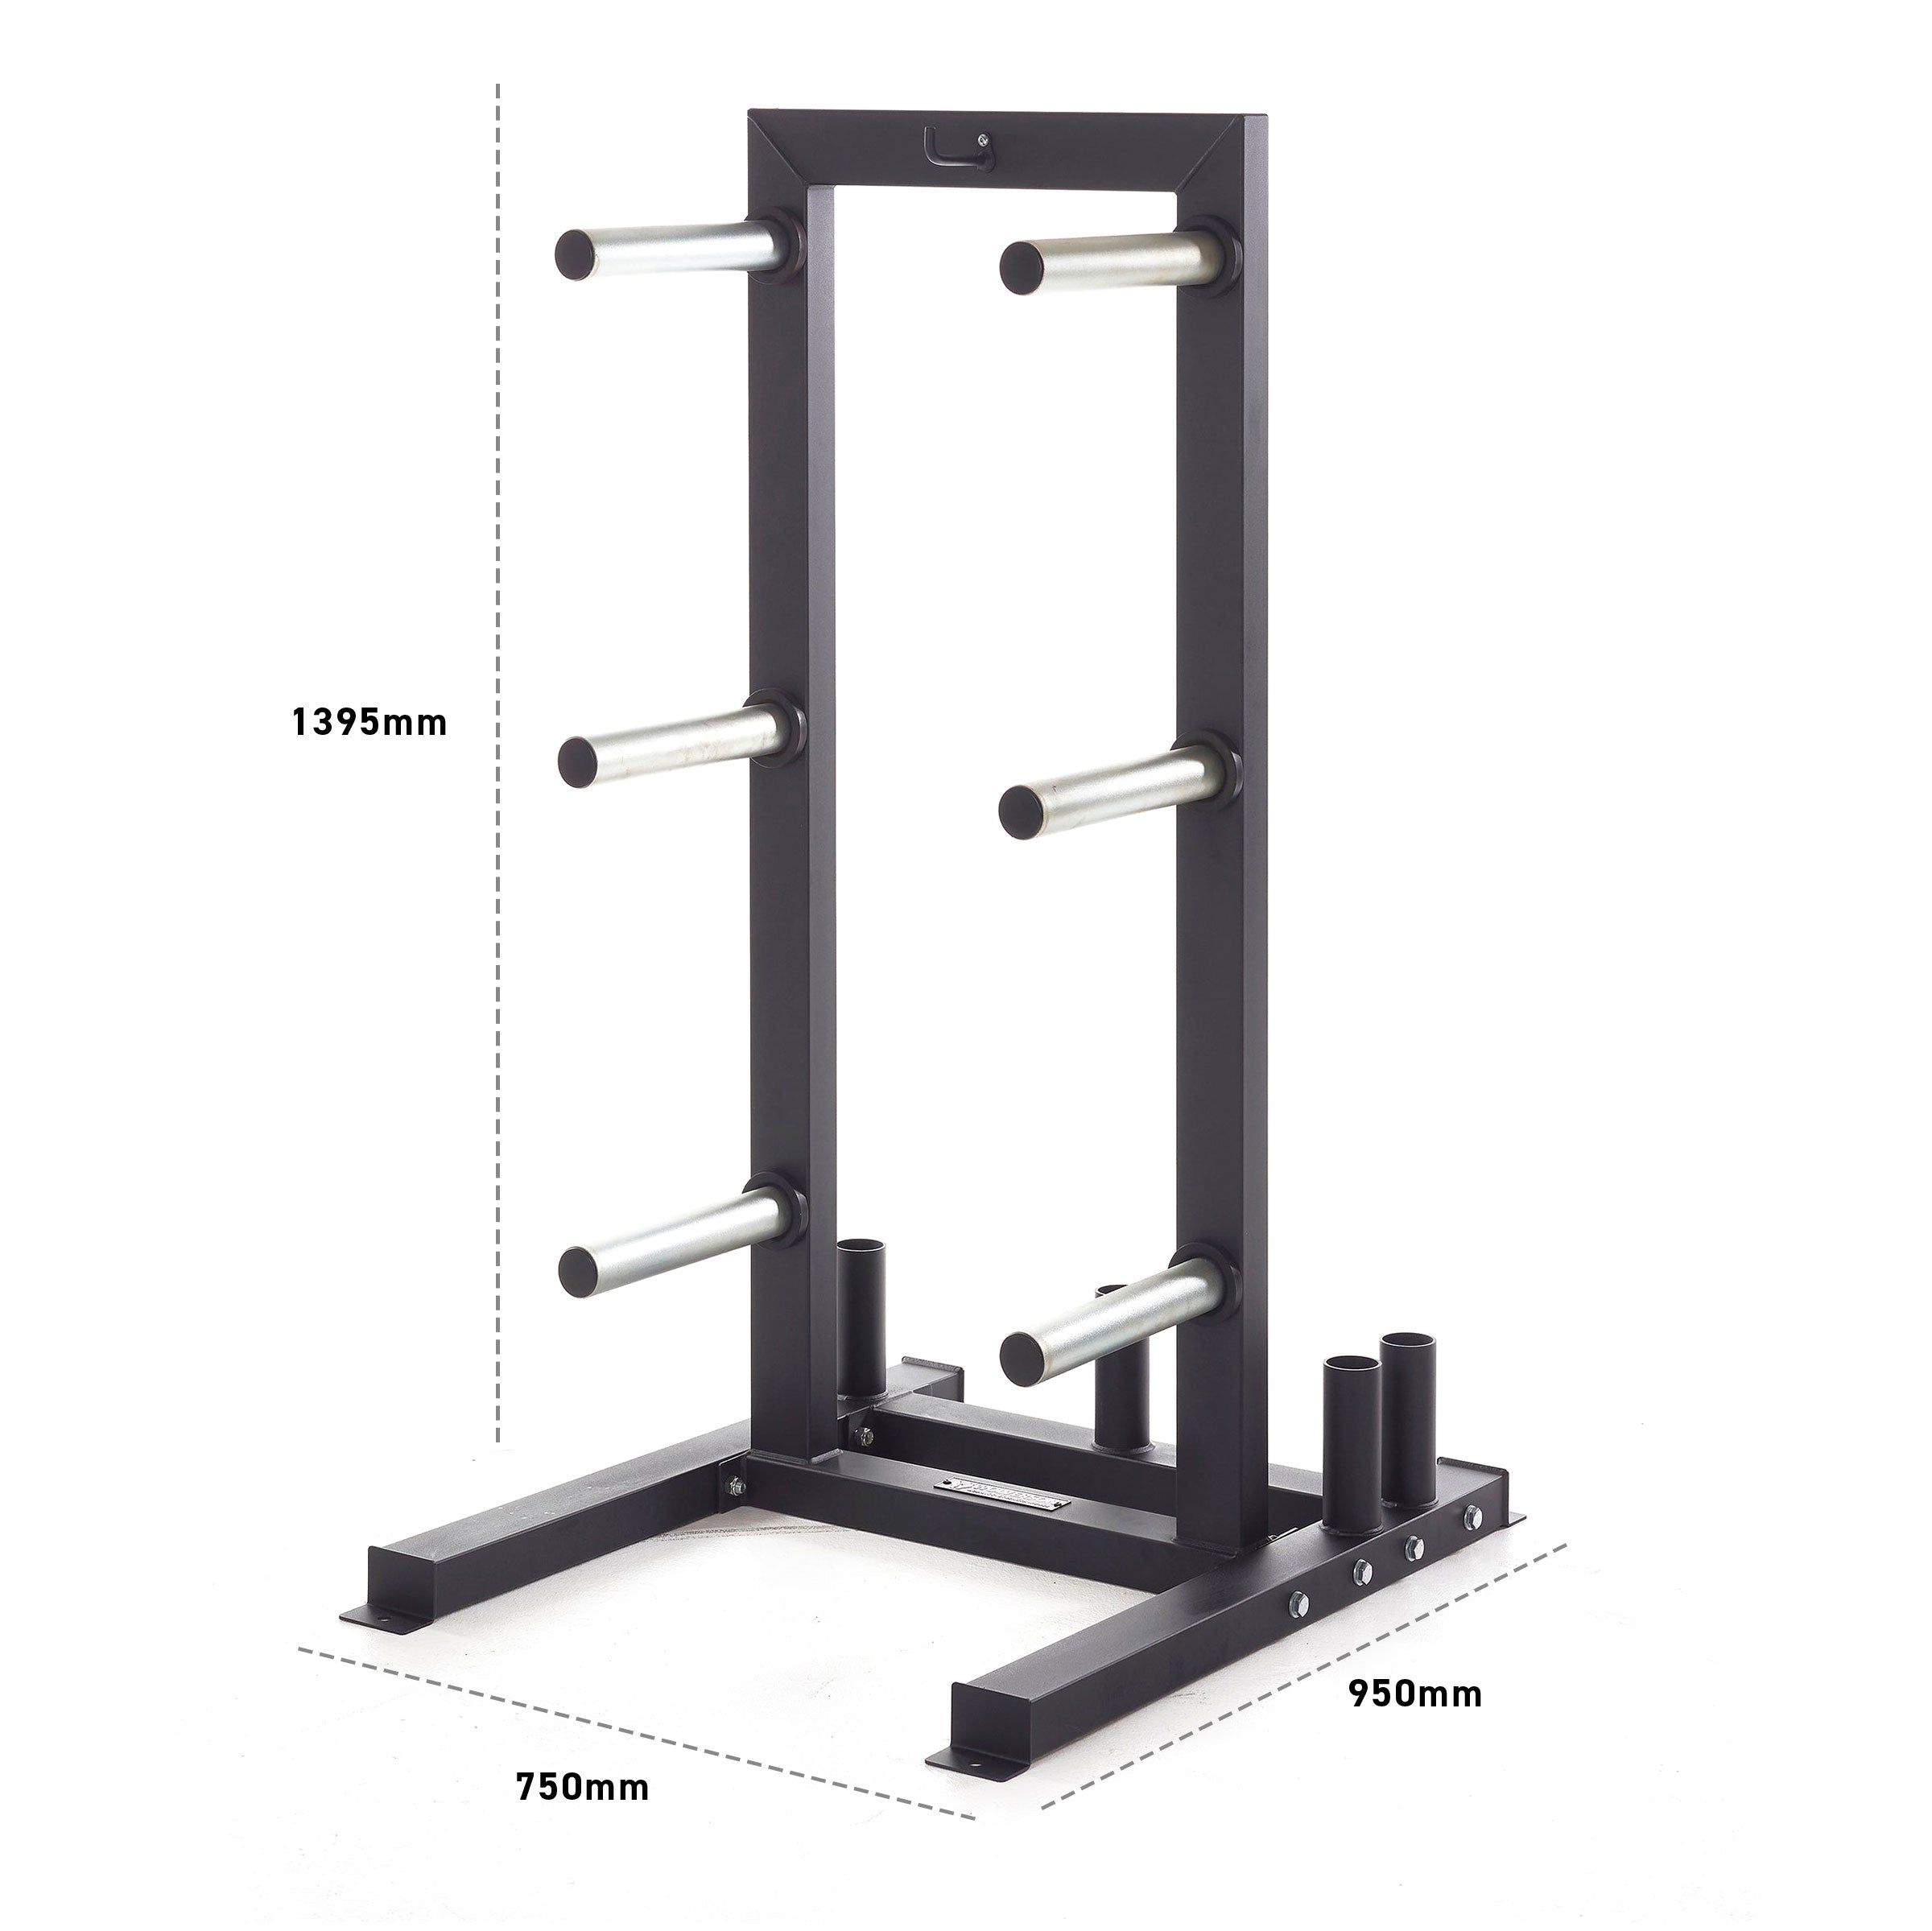 Wolverson Accessory Storage System - Wolverson Fitness